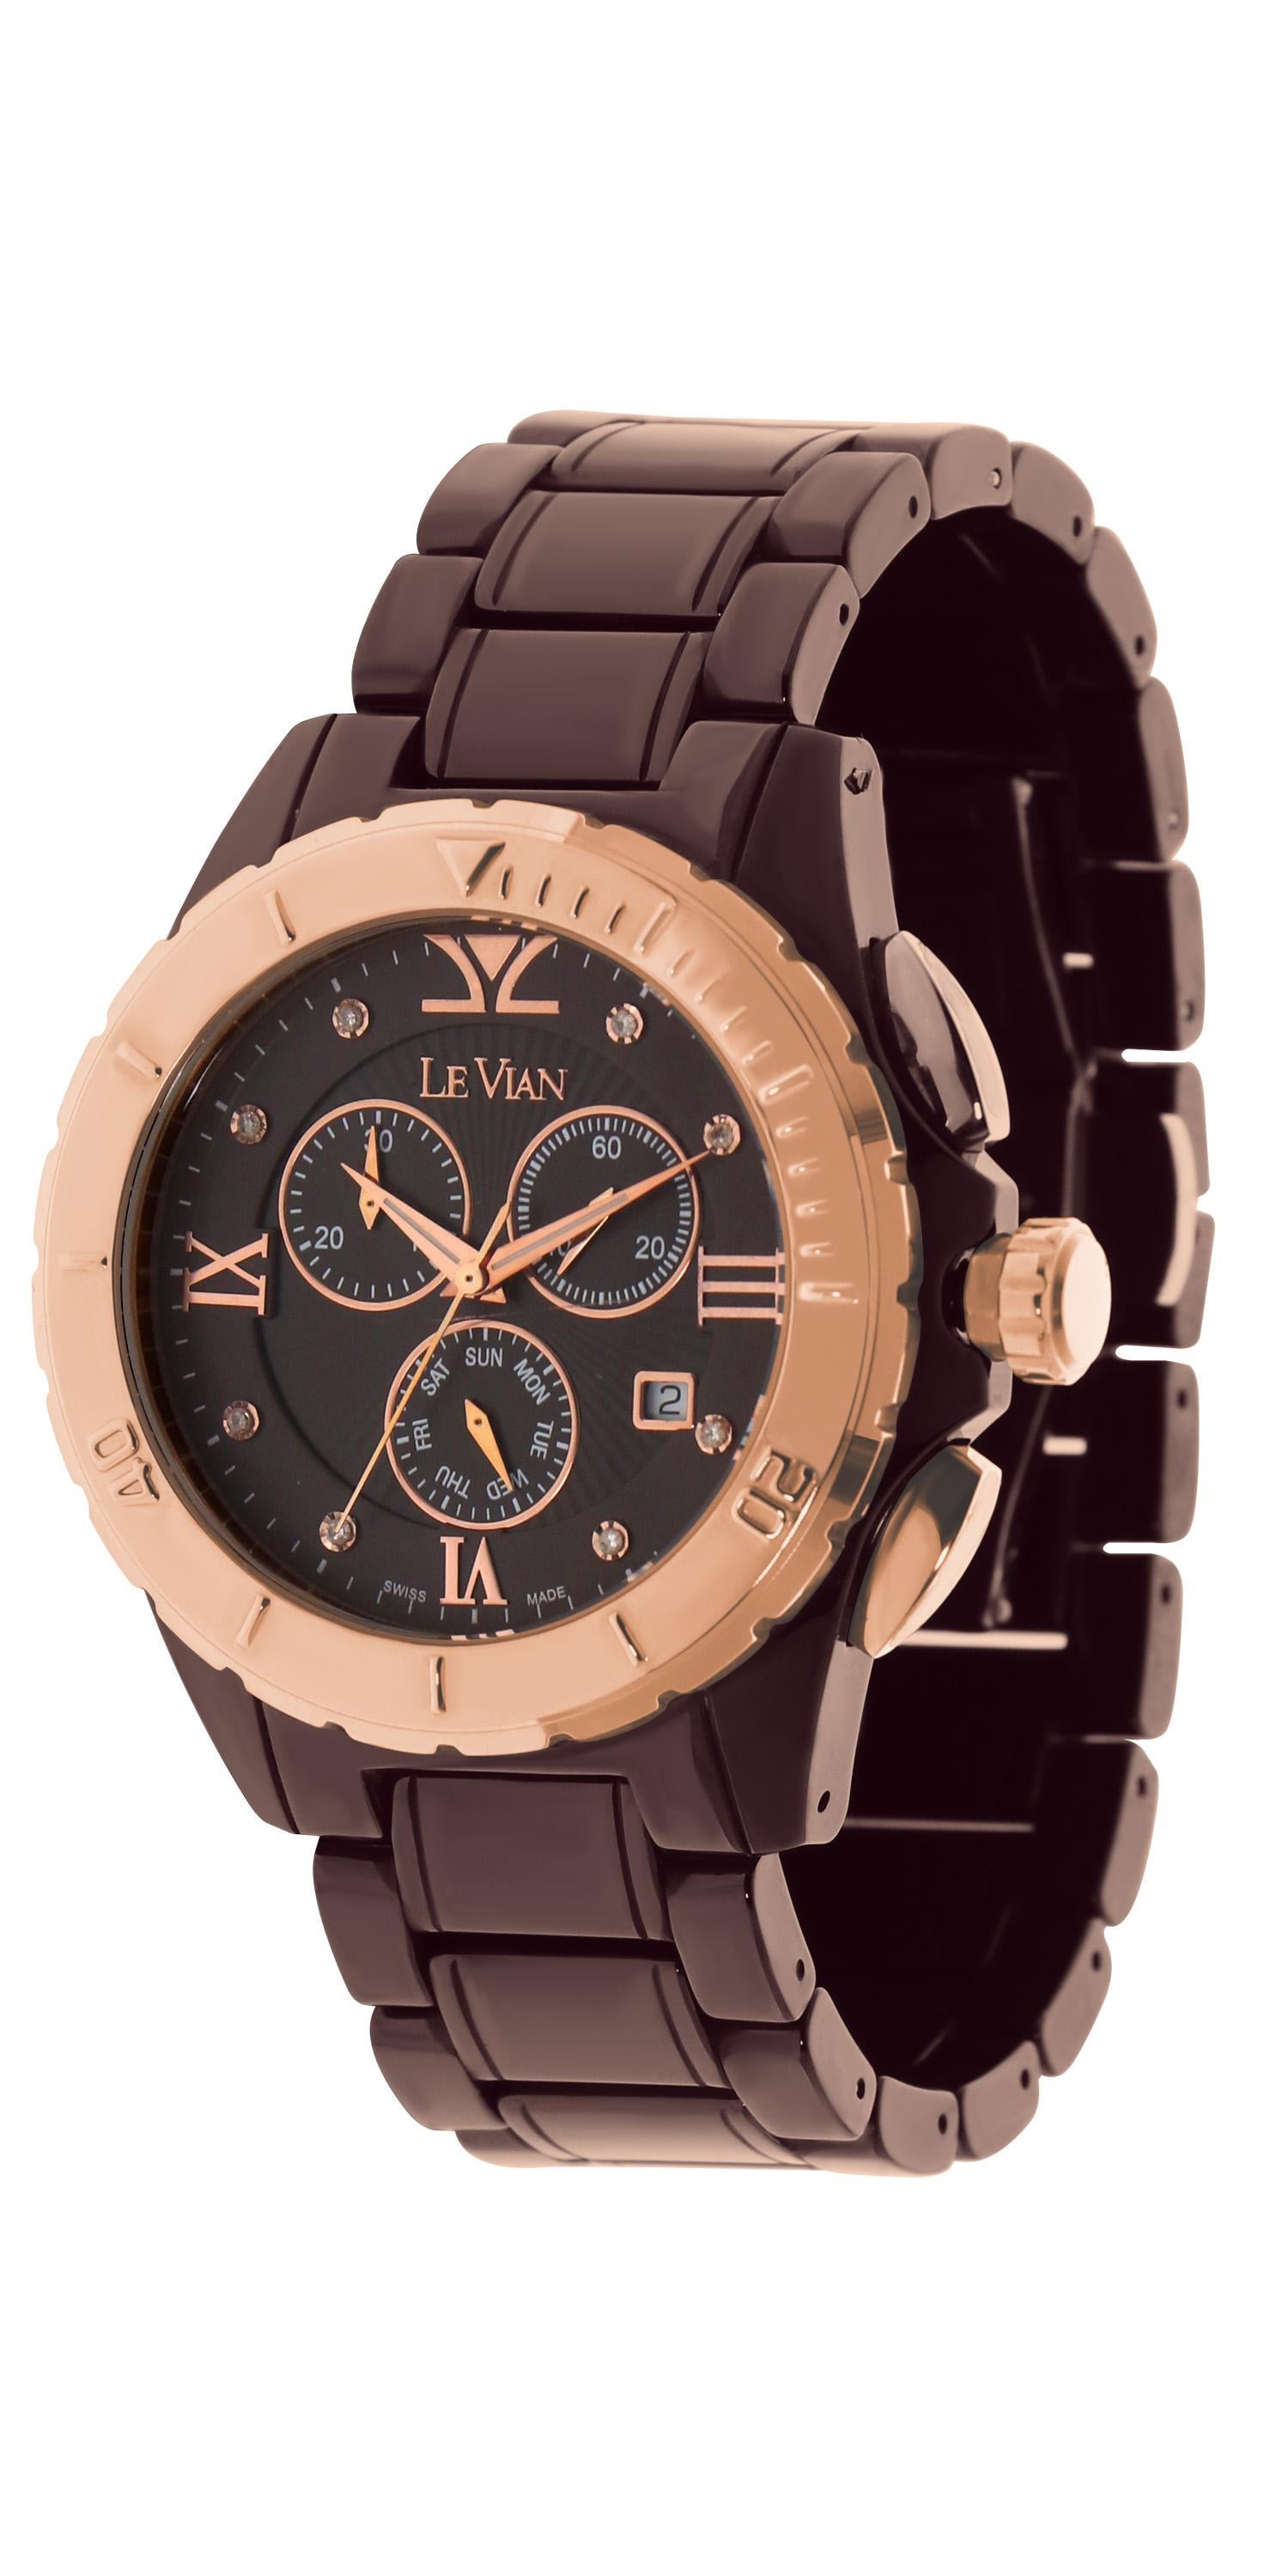 Le Vian 45mm Round Wristwatch featuring 0.06cts of Vanilla Diamonds, in Chocolate Stainless Steel and a Ceramic Band
